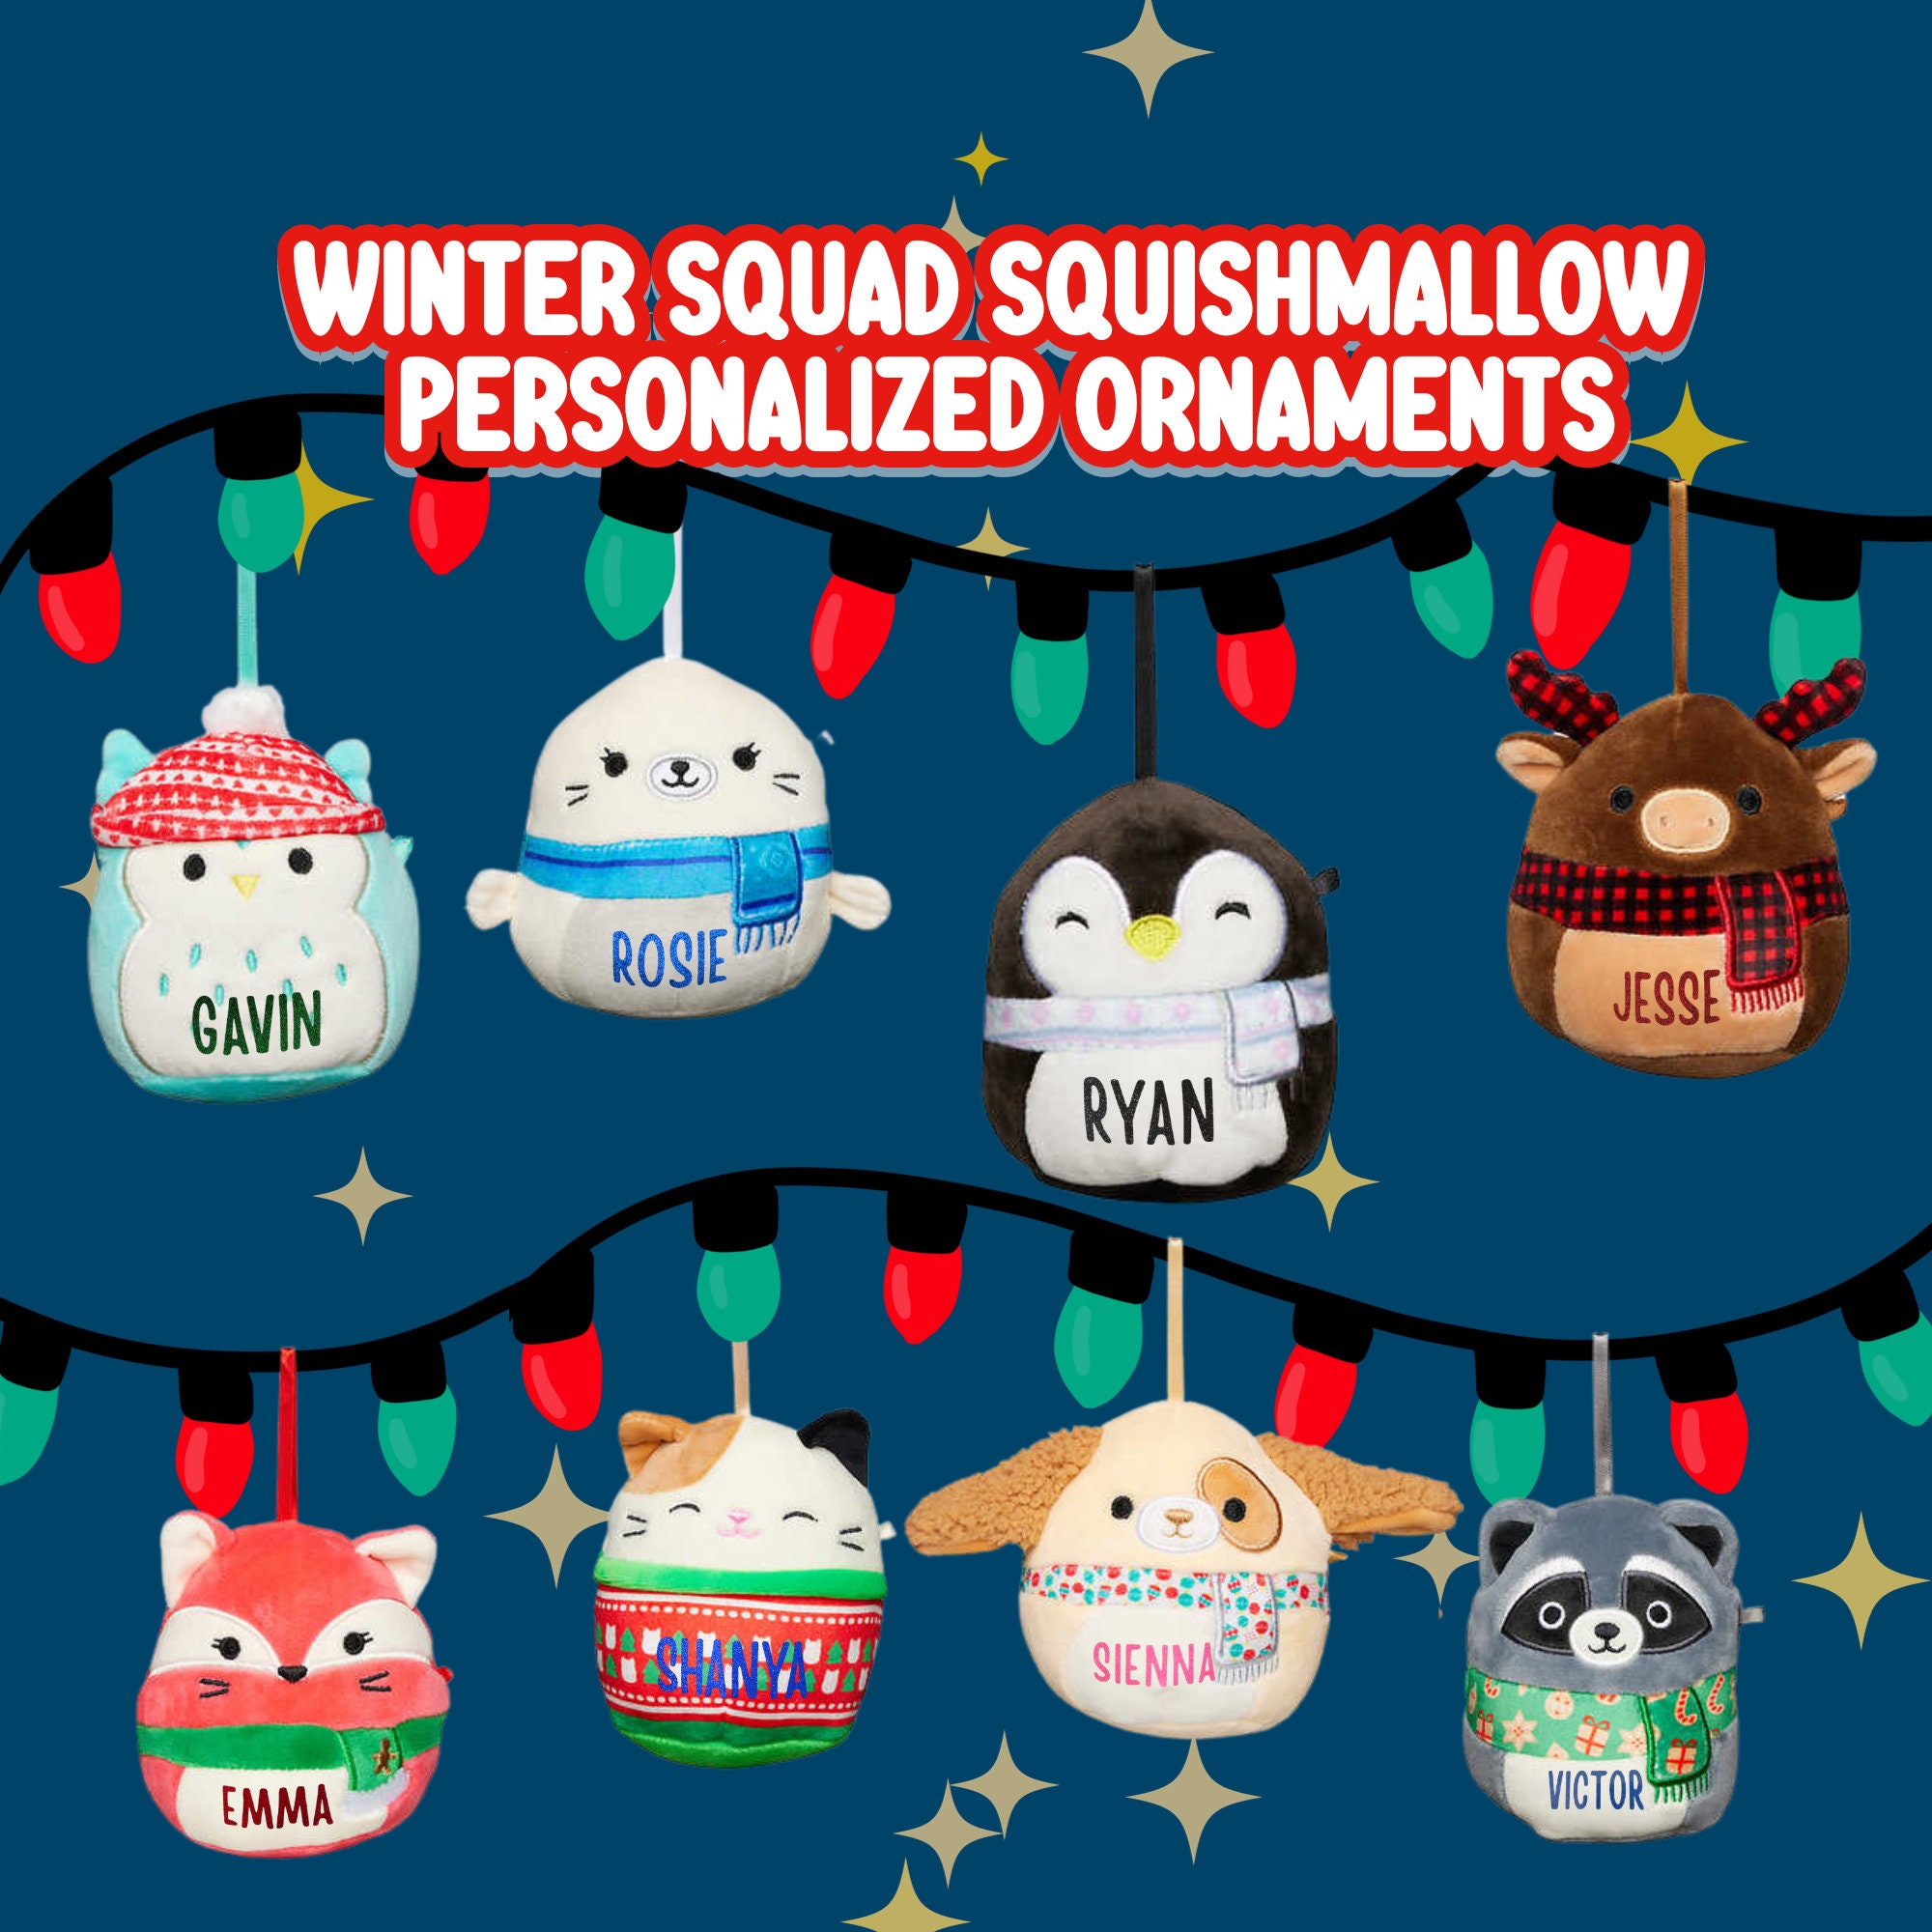 Squishmallows Official Cam the Cat 4-Inch Ornament Plush